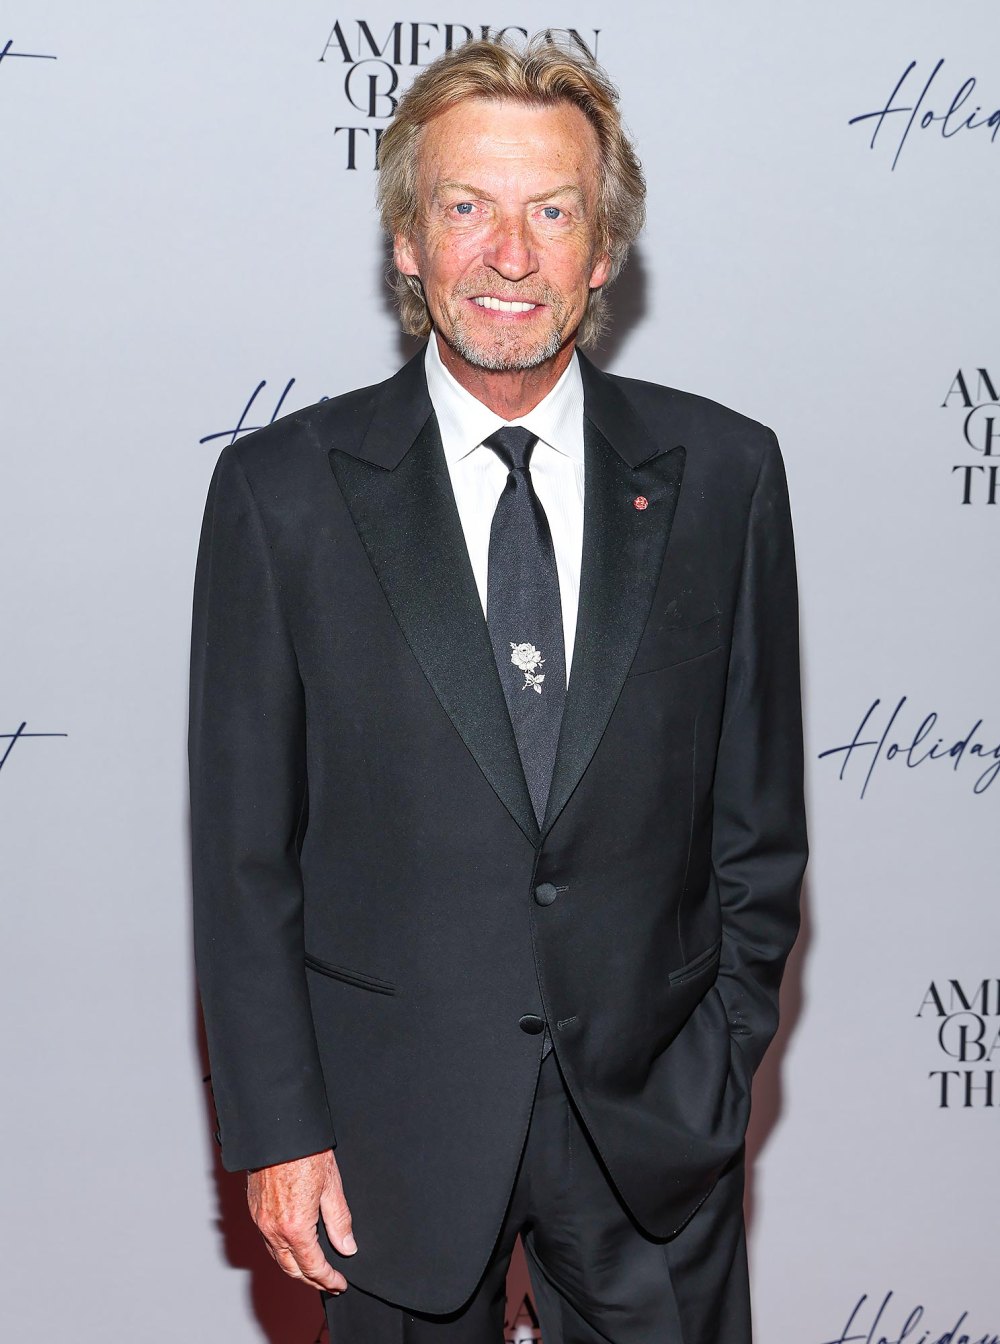 Nigel Lythgoe Accused of Sexual Assault for a 4th Time After So You Think You Can Dance Exit